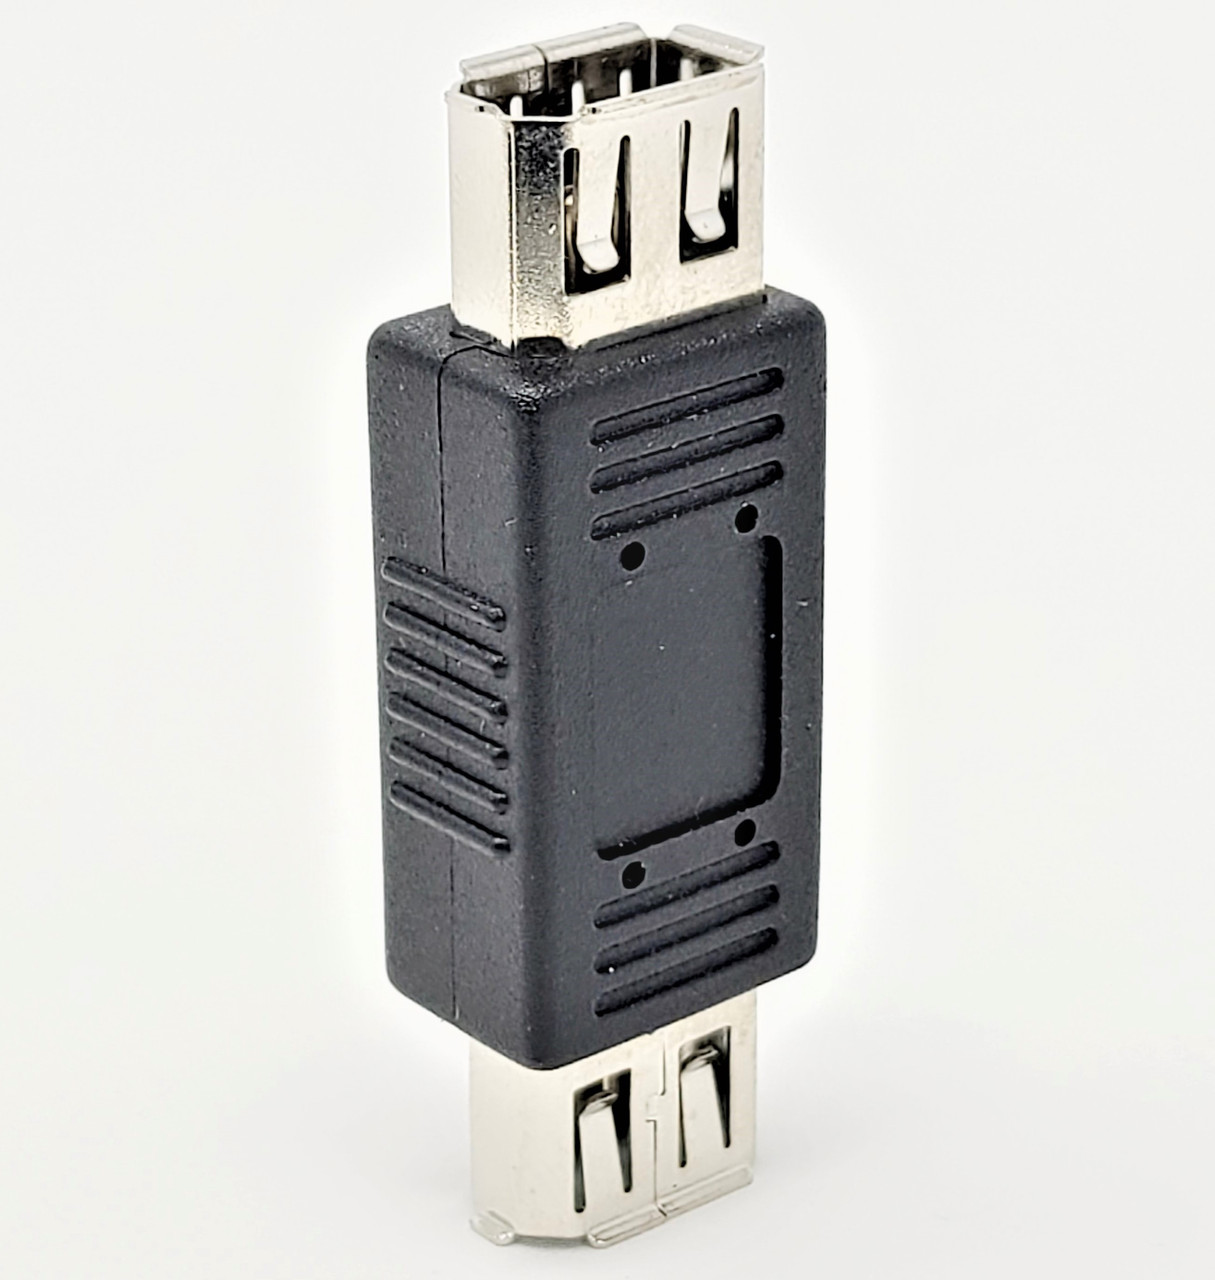 FireWire (IEEE 1394) 6-Pin Female to 6-Pin Female Adapter